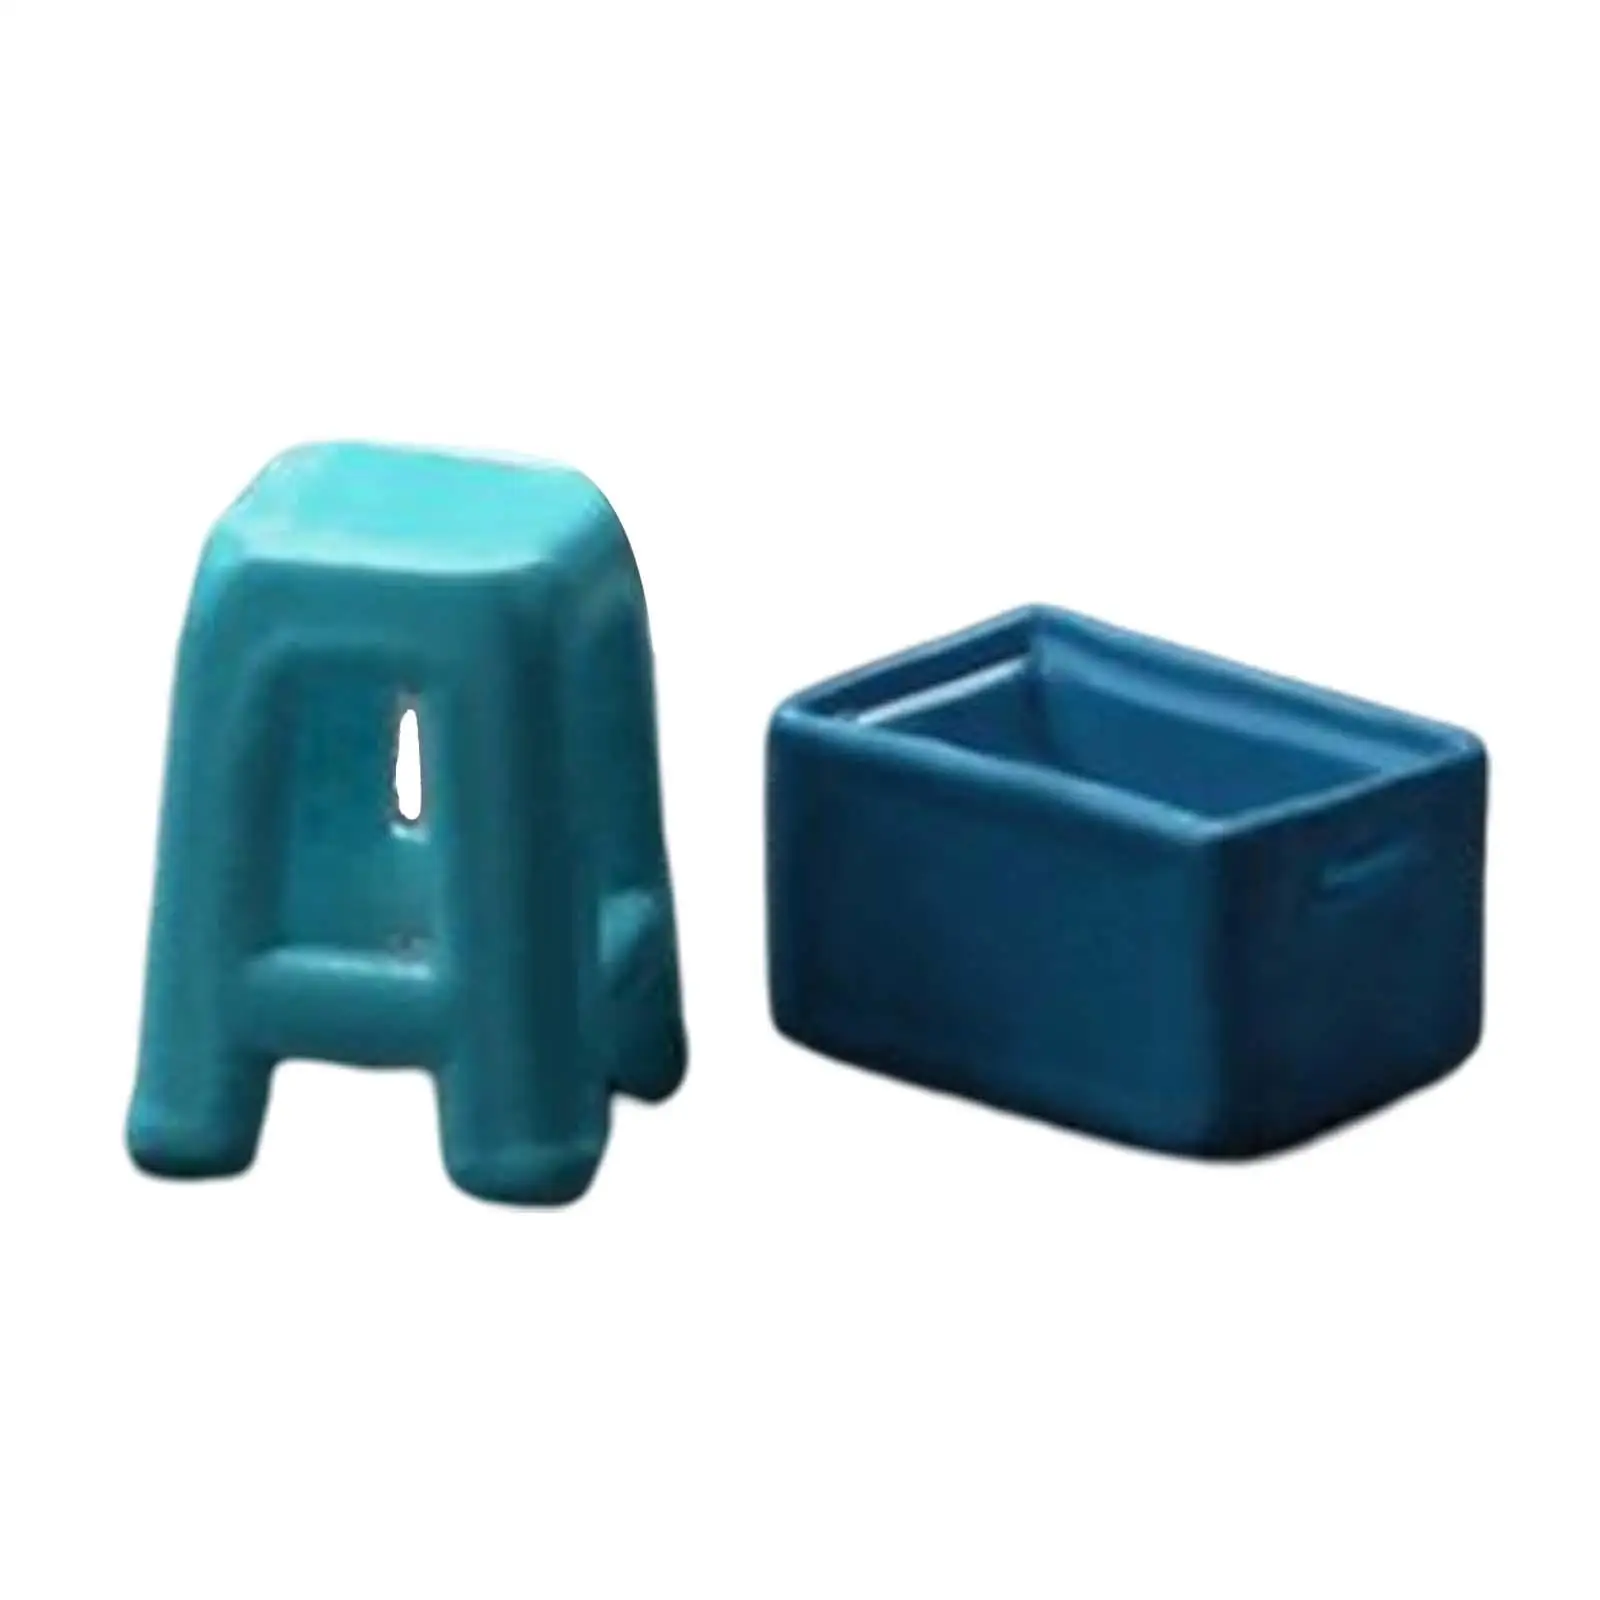 1/64 Tiny Chairs 1/64 Scale Painted Stool for Sand Table Decoration Photo Prop Decor Diorama Layout Miniature Scenes Decor